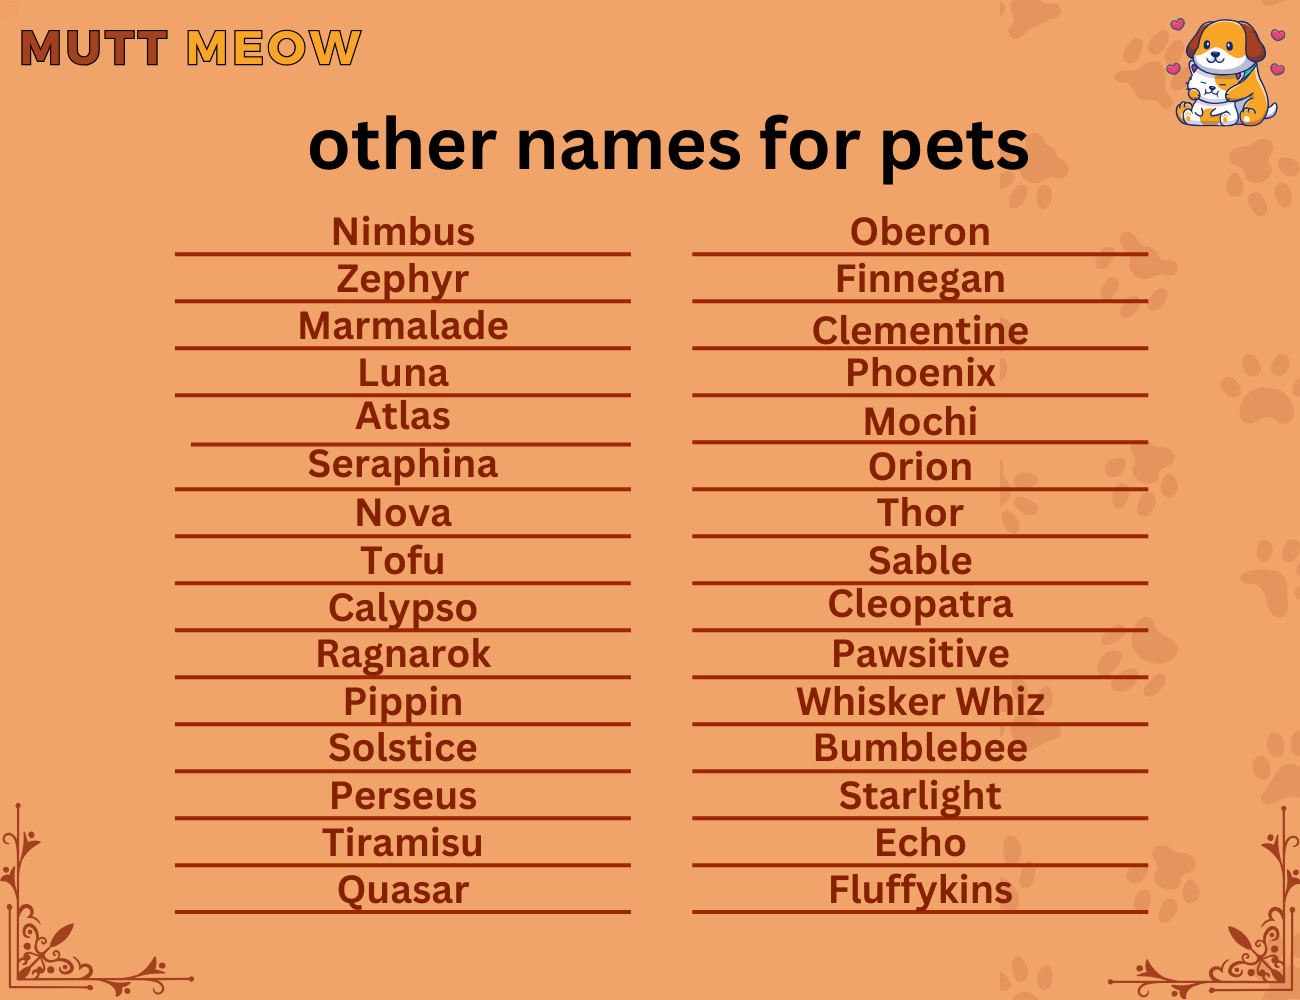 other names for petS